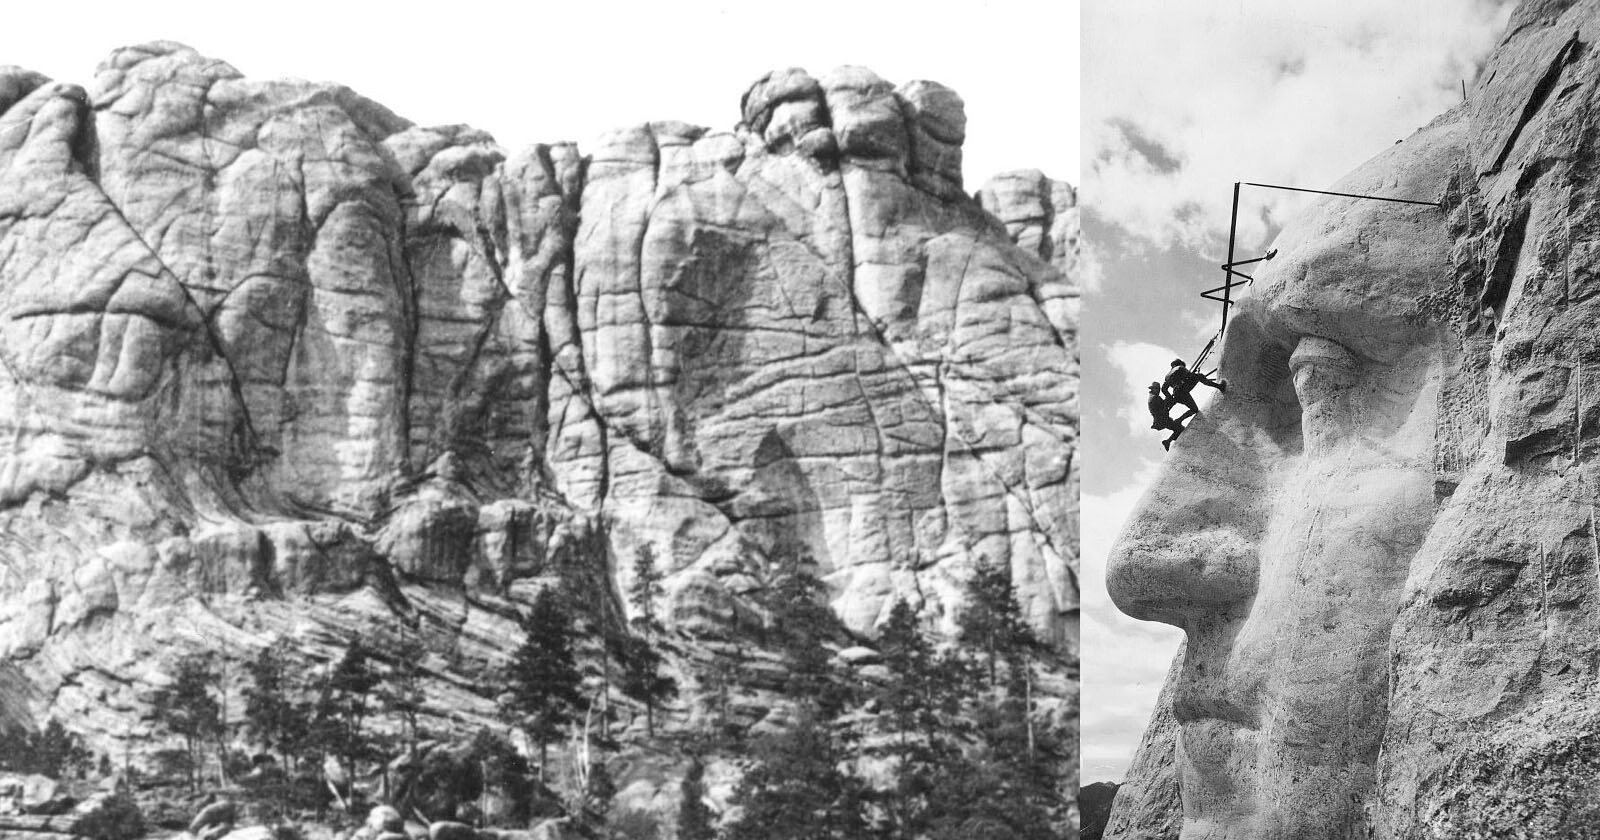  historical photos mount rushmore before famous faces 